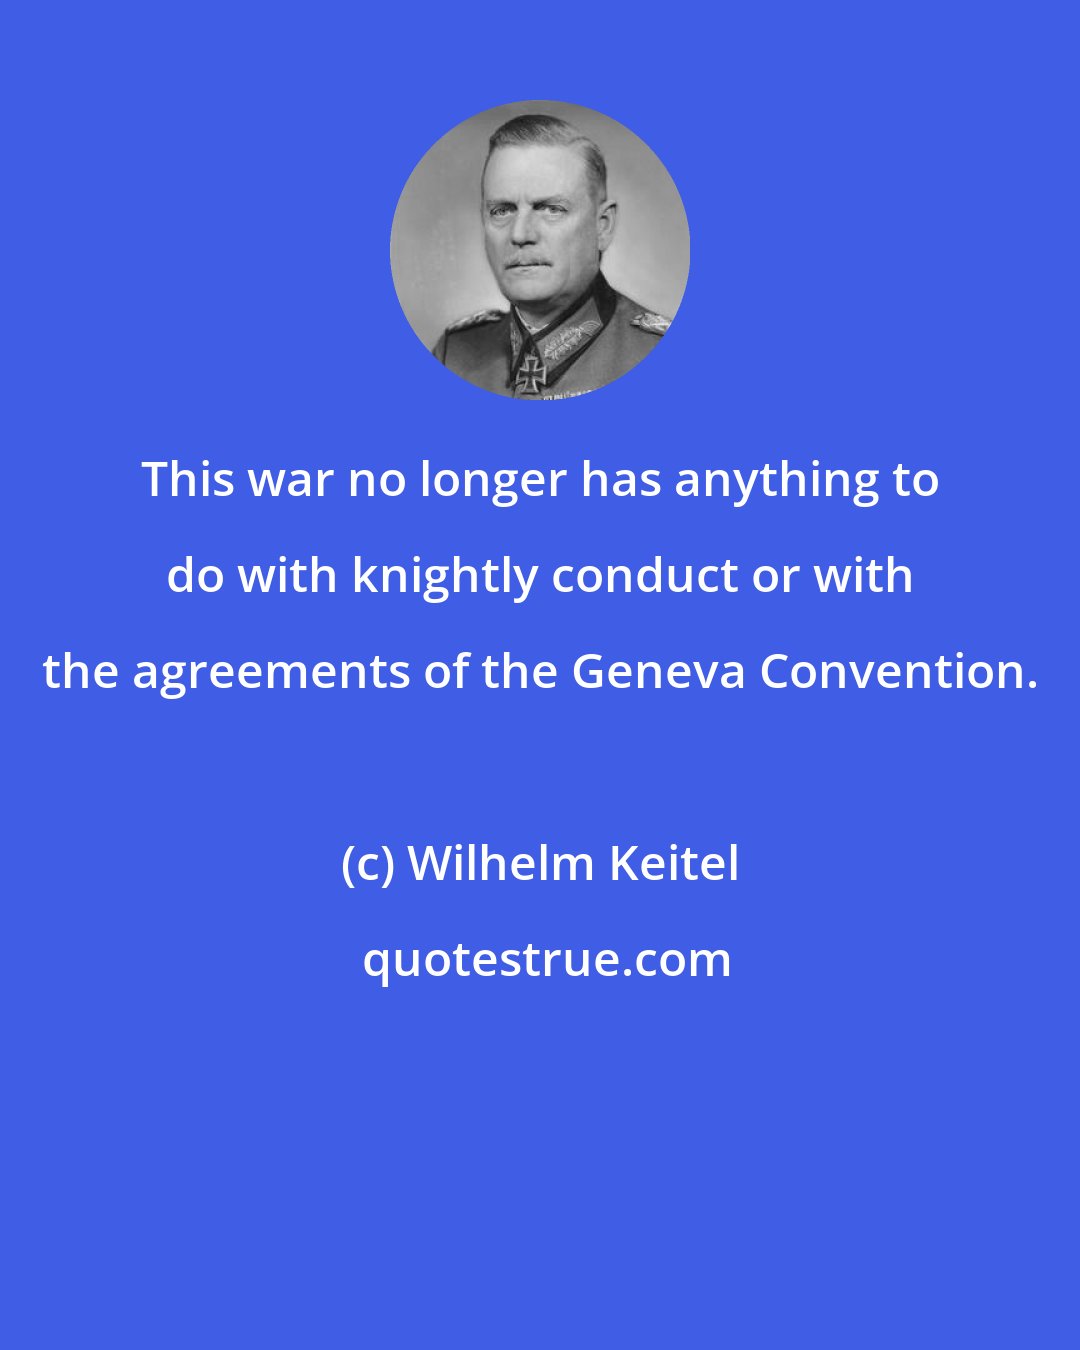 Wilhelm Keitel: This war no longer has anything to do with knightly conduct or with the agreements of the Geneva Convention.